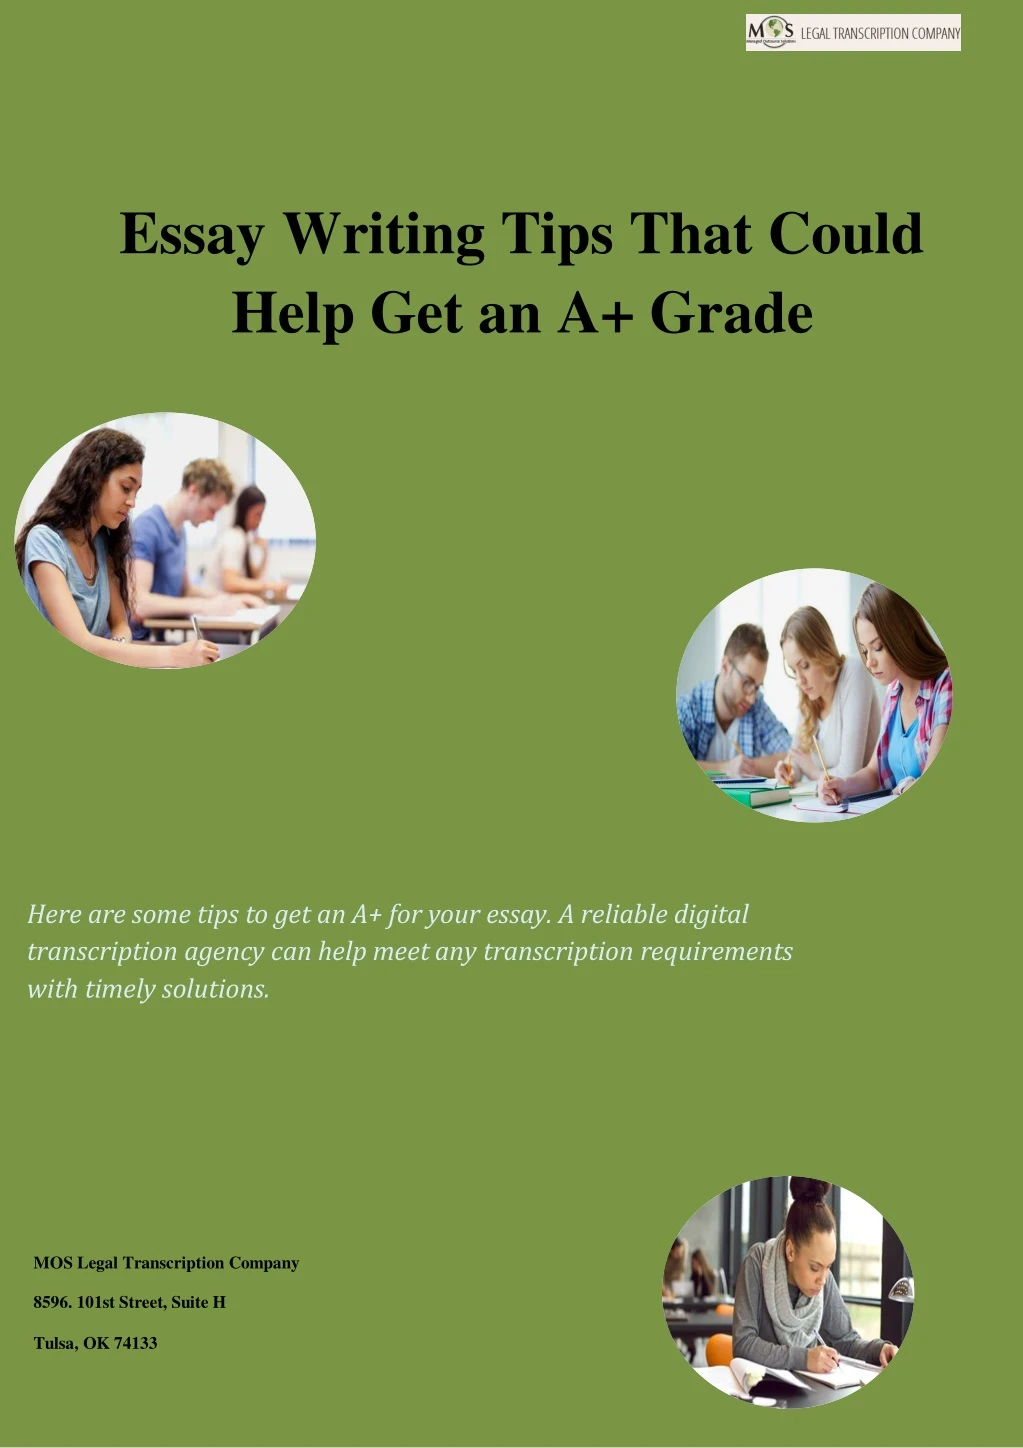 essay writing tips that could help get an a grade